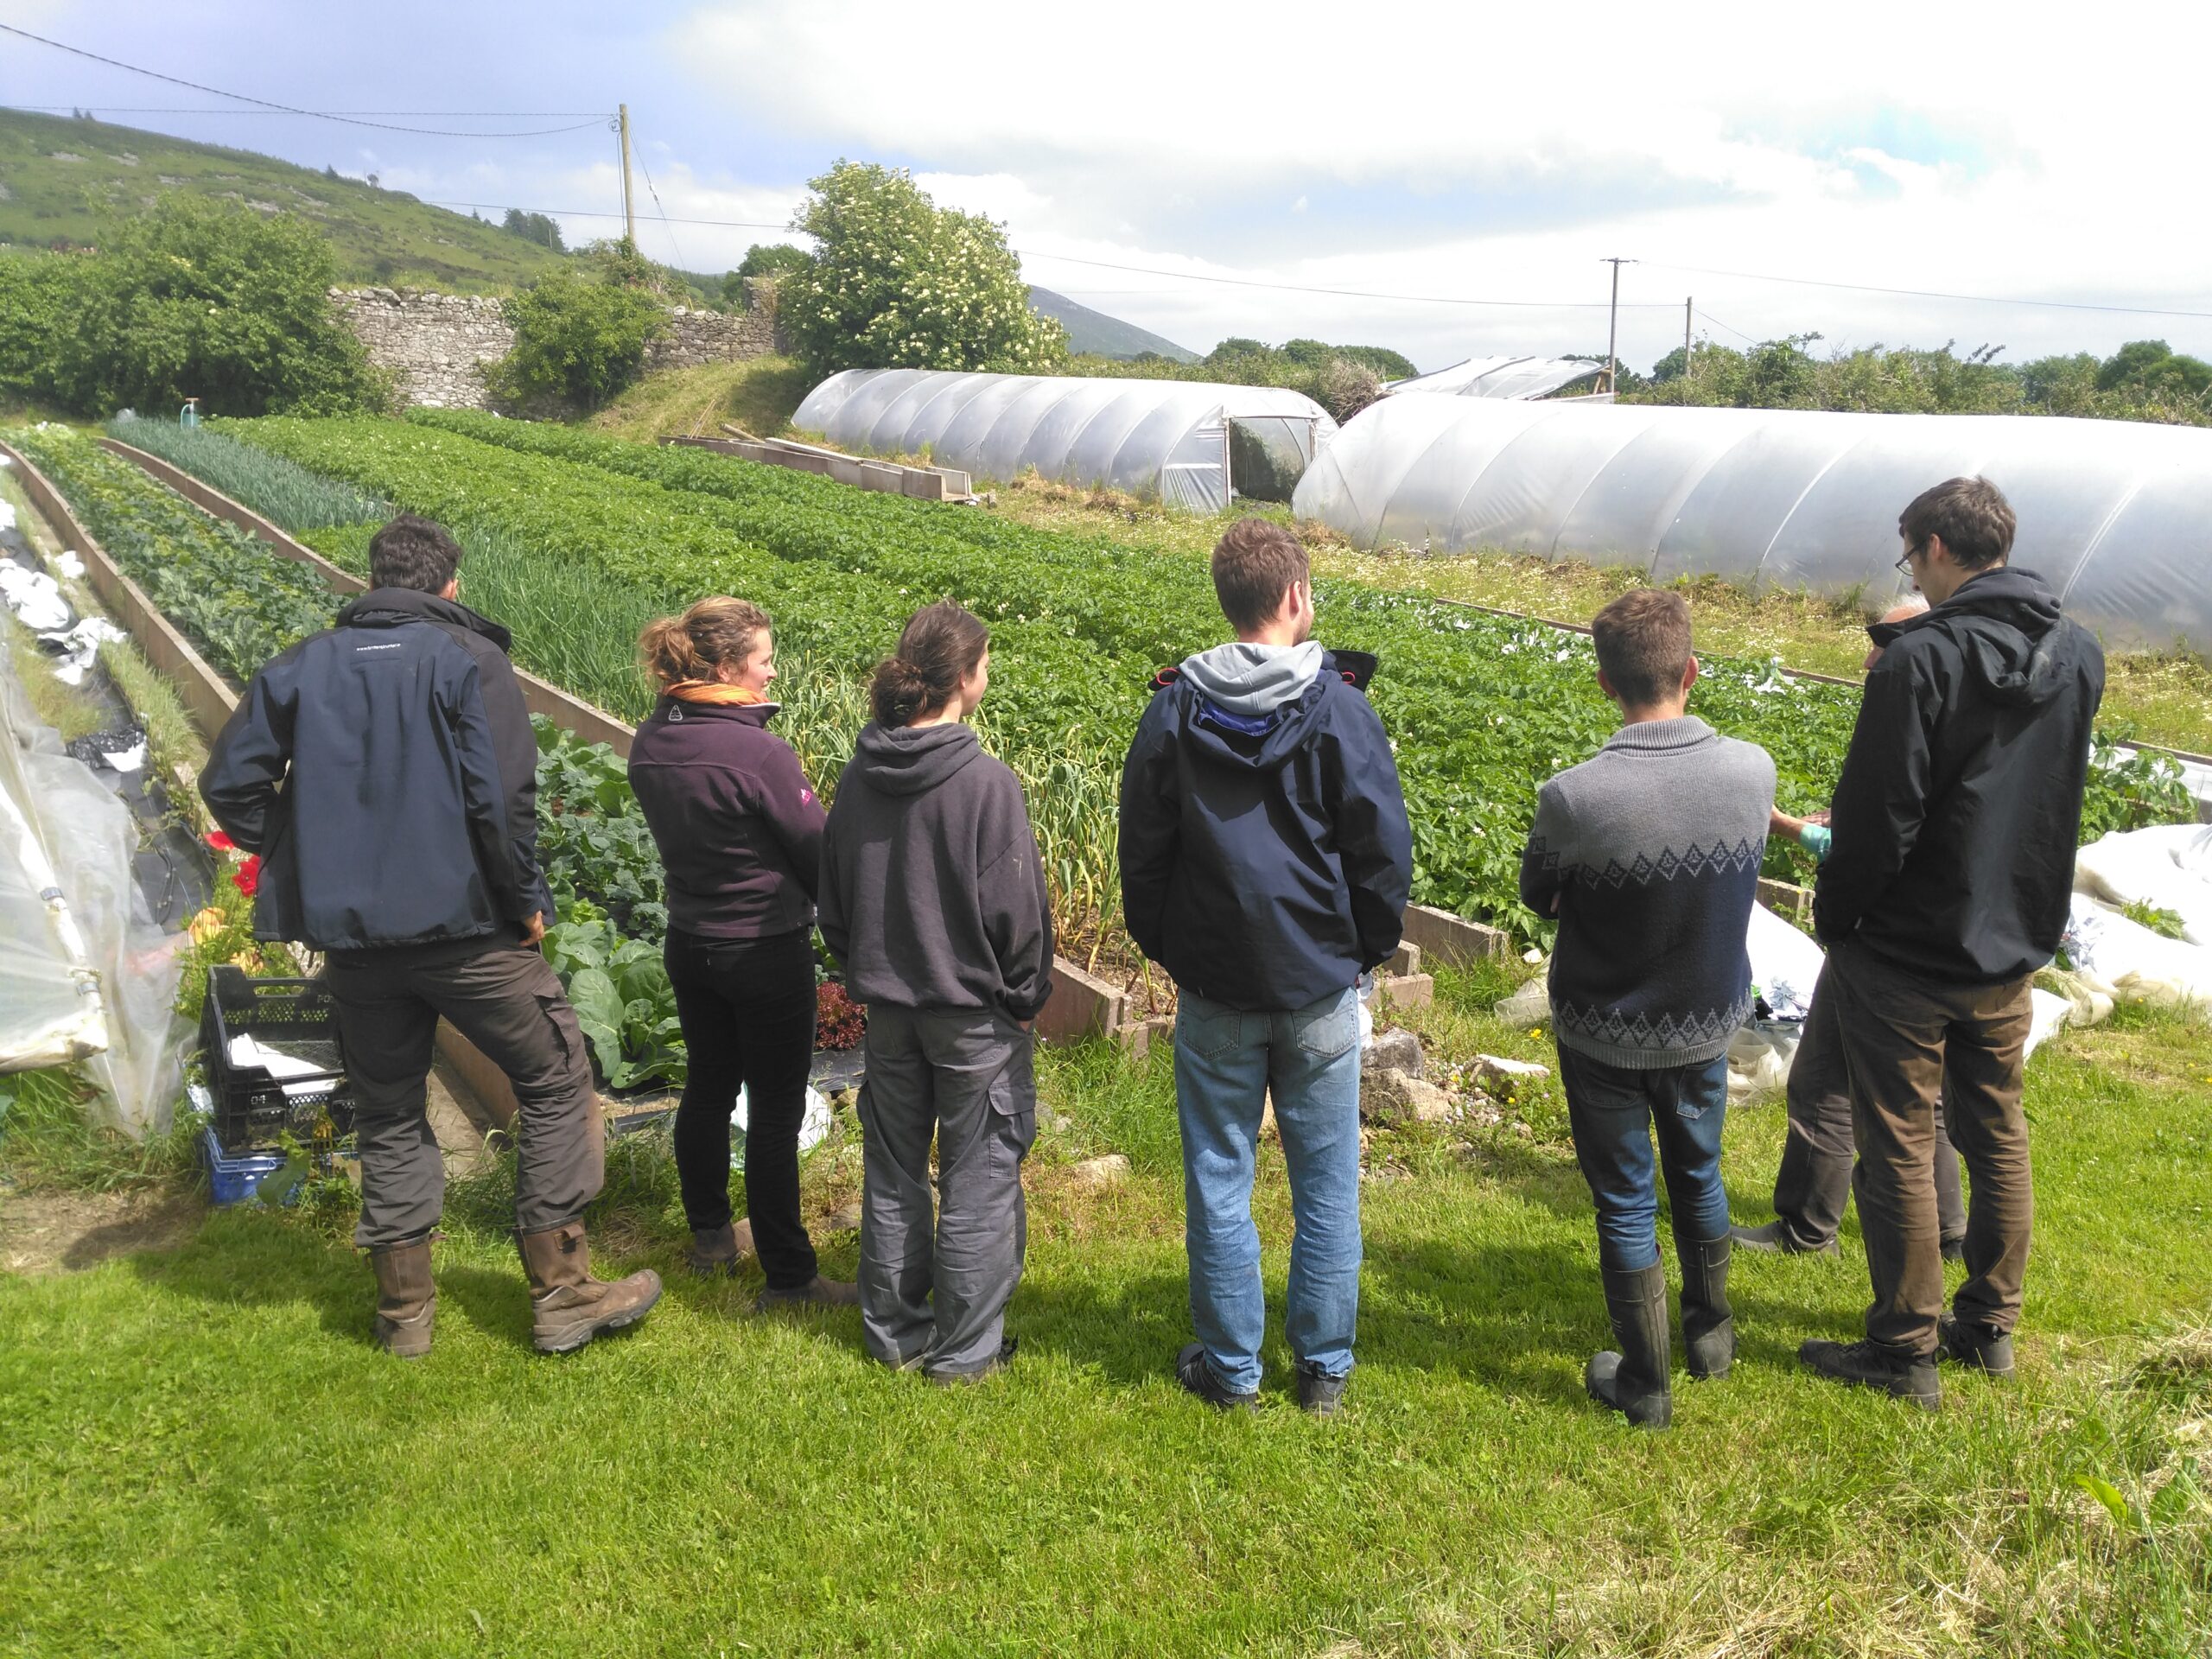 Interns visiting one of the farms involved in the program